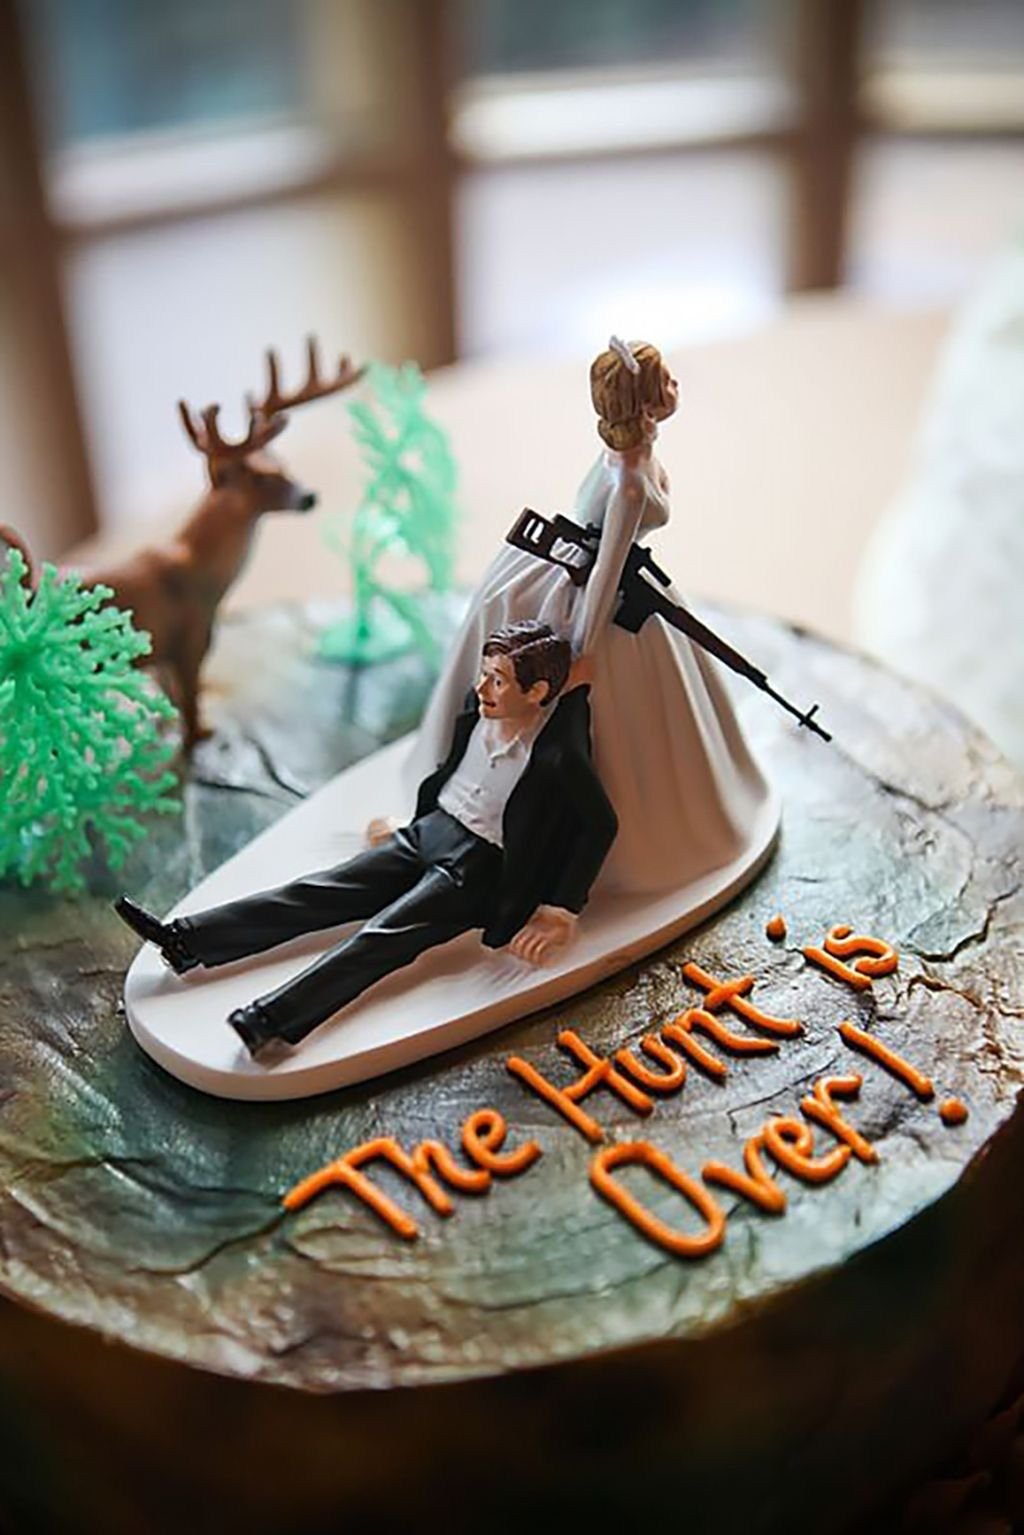 The hunt is over cake.jpg